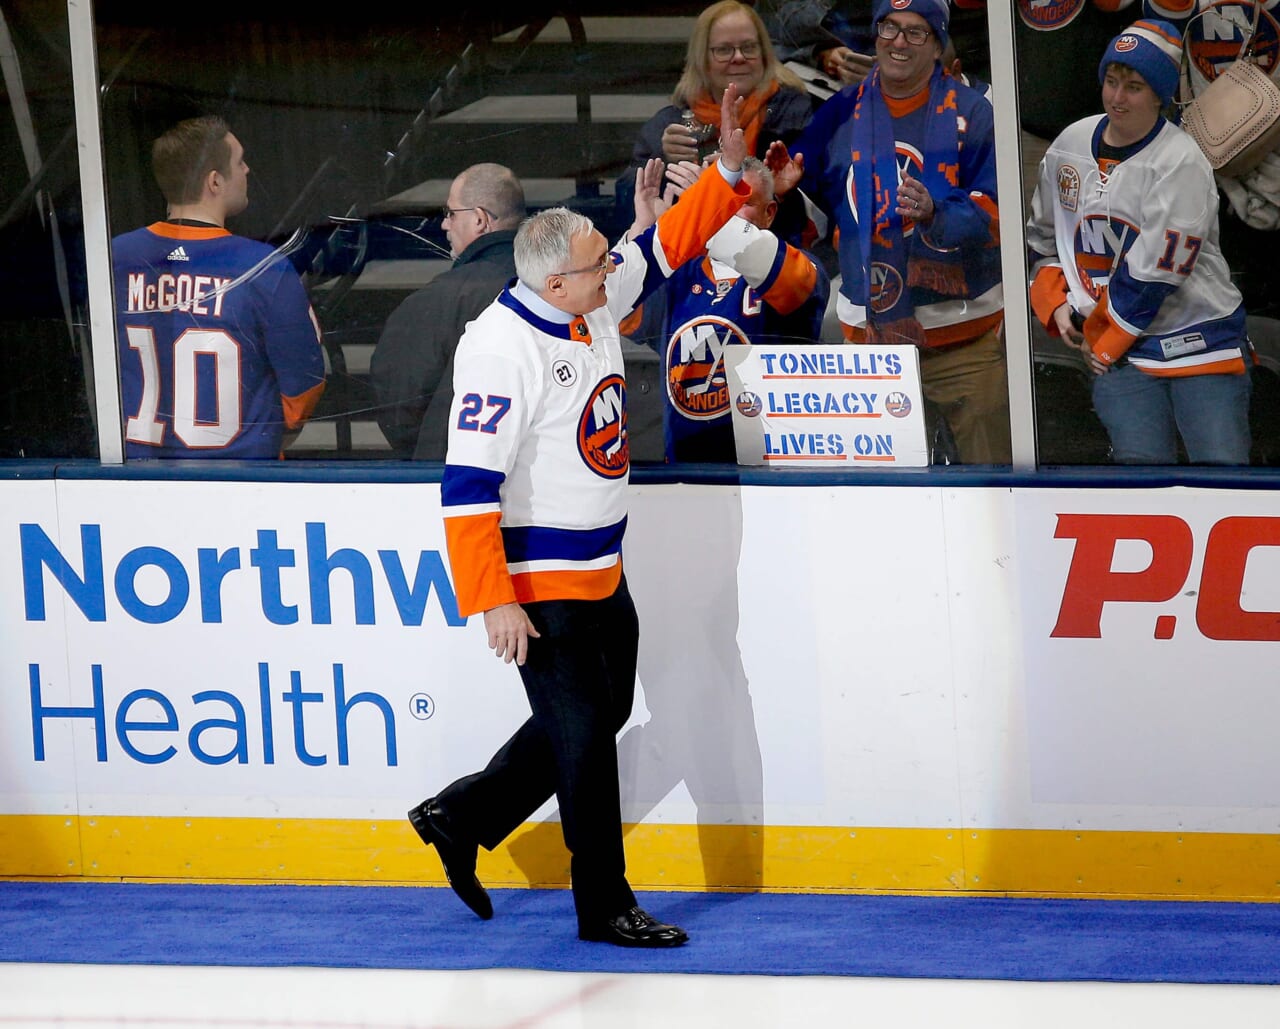 Who should be the next Islander to go into the Hockey Hall of Fame?